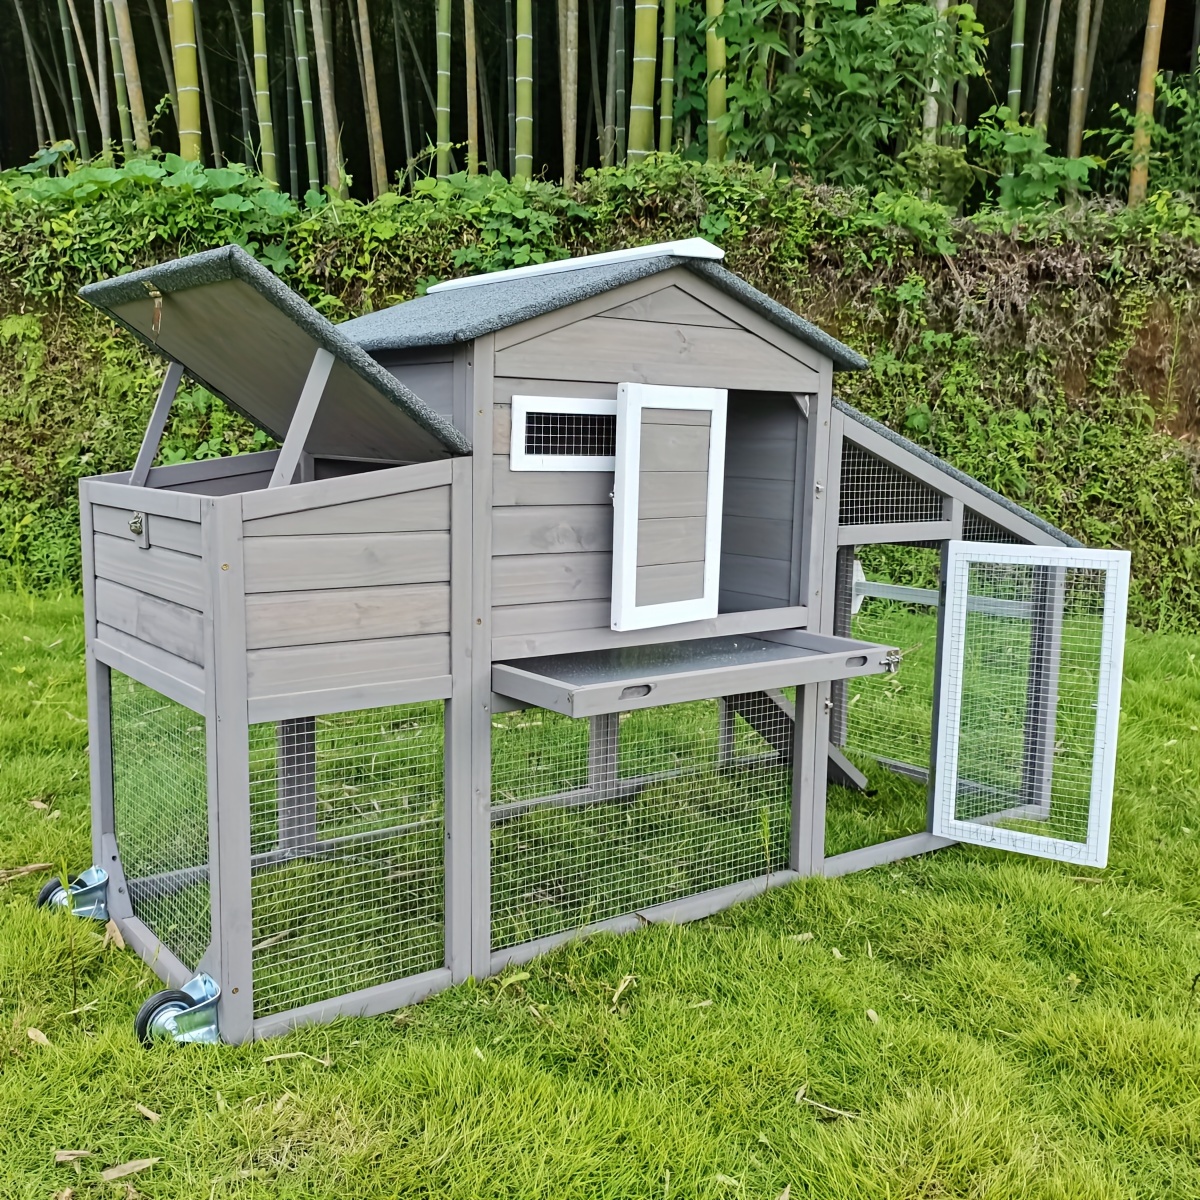 

Chicken Coop Wooden Backyard Hen House - Indoor Outdoor For 2-3 Chickens, 2 Story Poultry Cage With Run, Chicken Nesting Box, Pull Out Trays And Anti-slip Asphalt Ramp